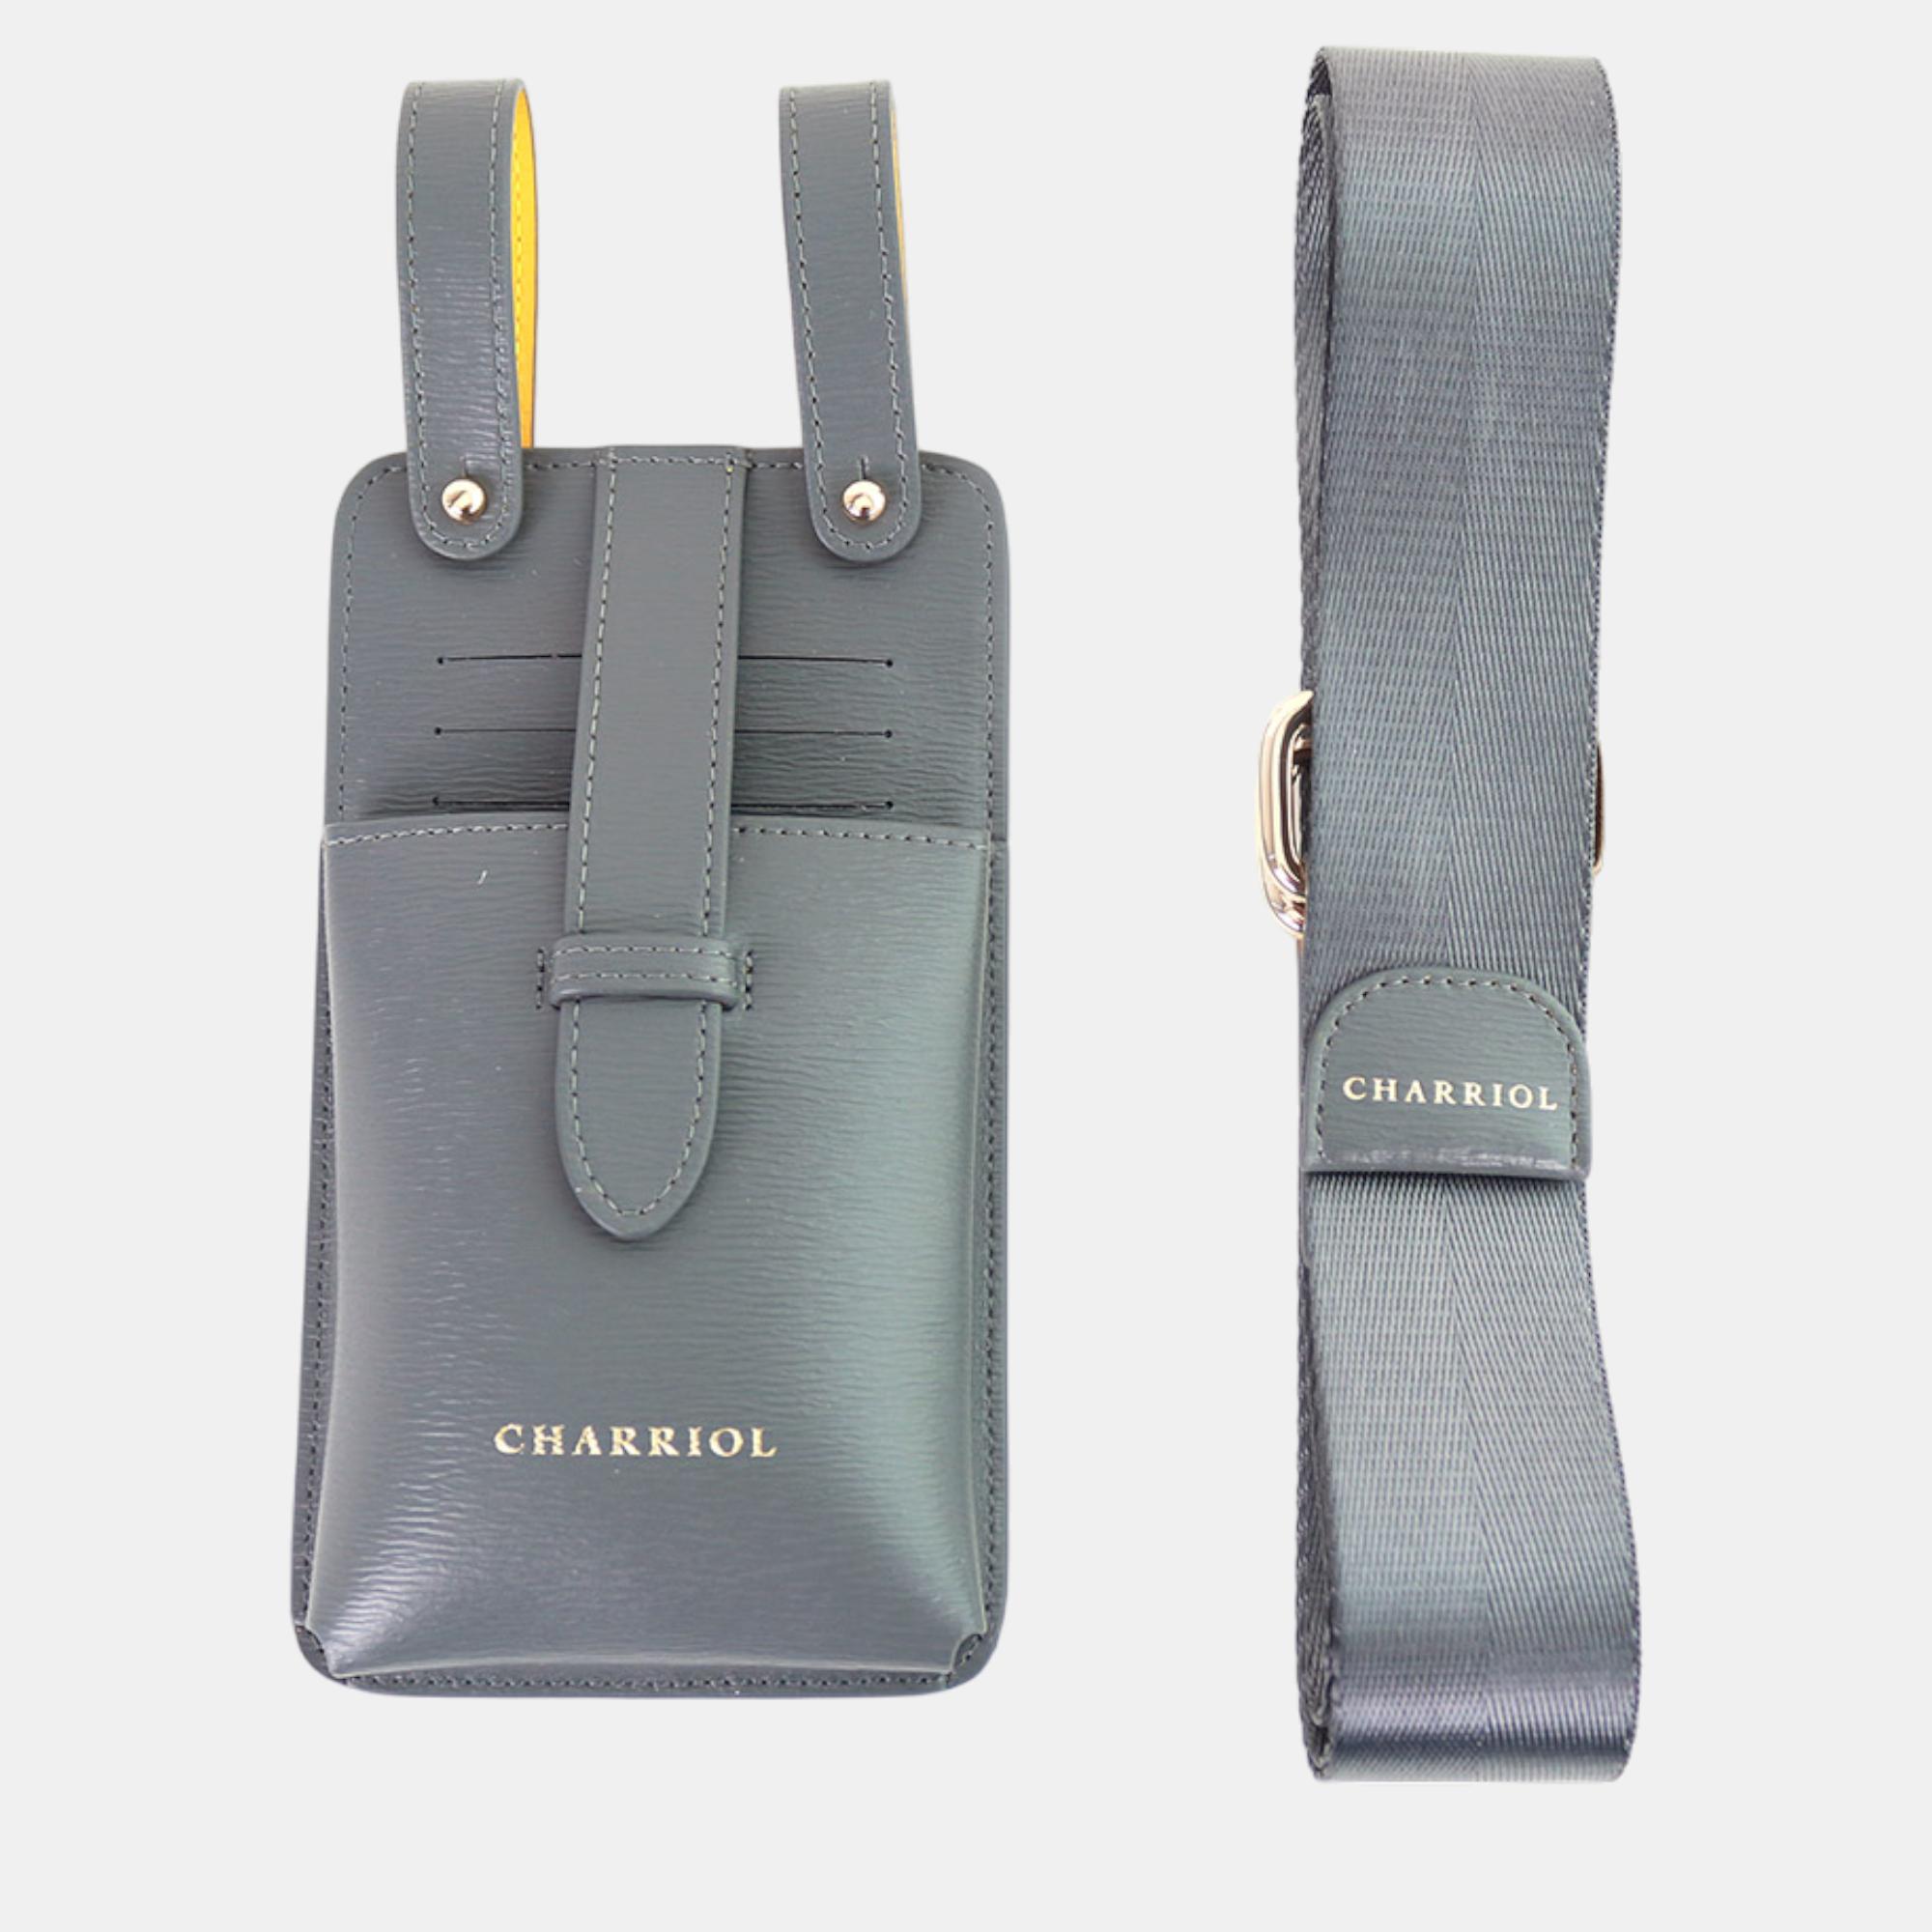 Charriol Grey / Yellow Leather  Mobile Accessories